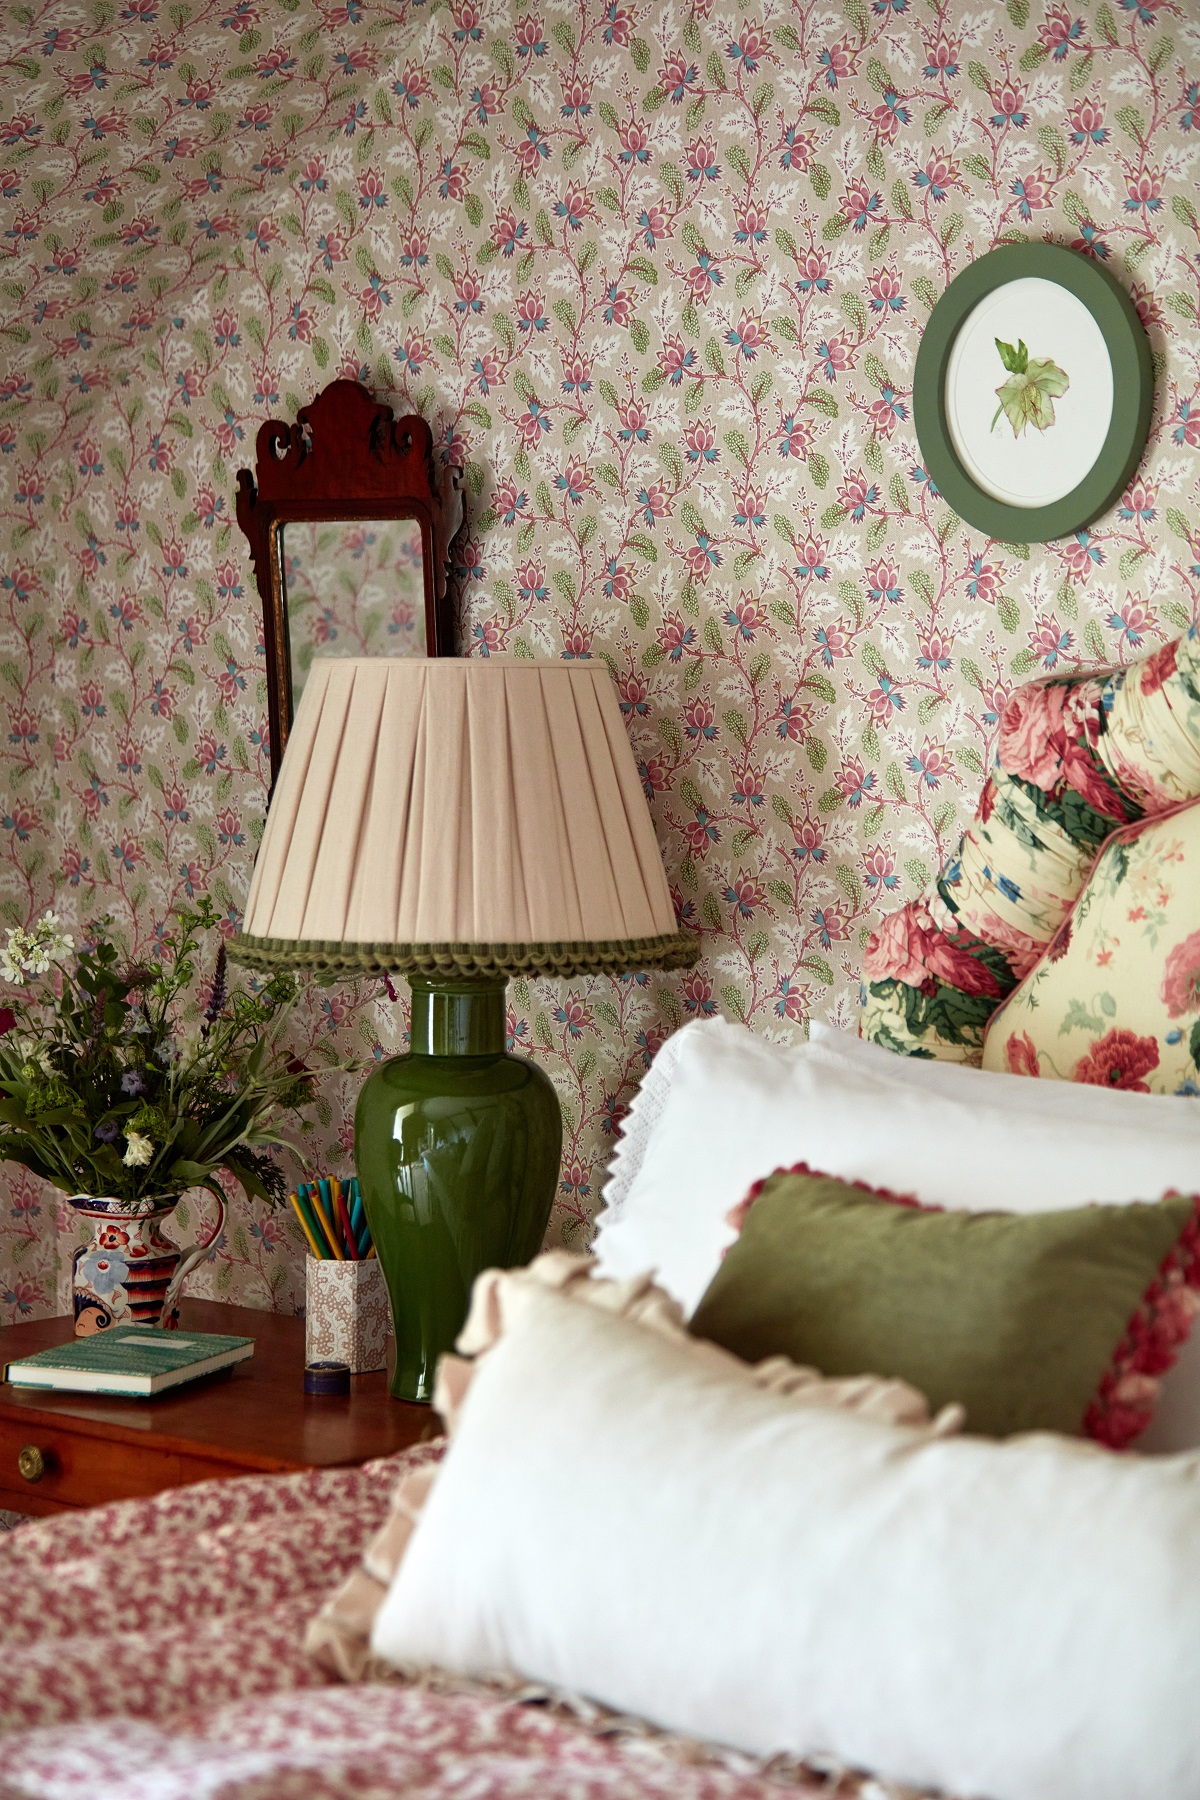 patterned wallpaper behind bed with floral patterend headboard and lamp and cushions with Sanderson trim